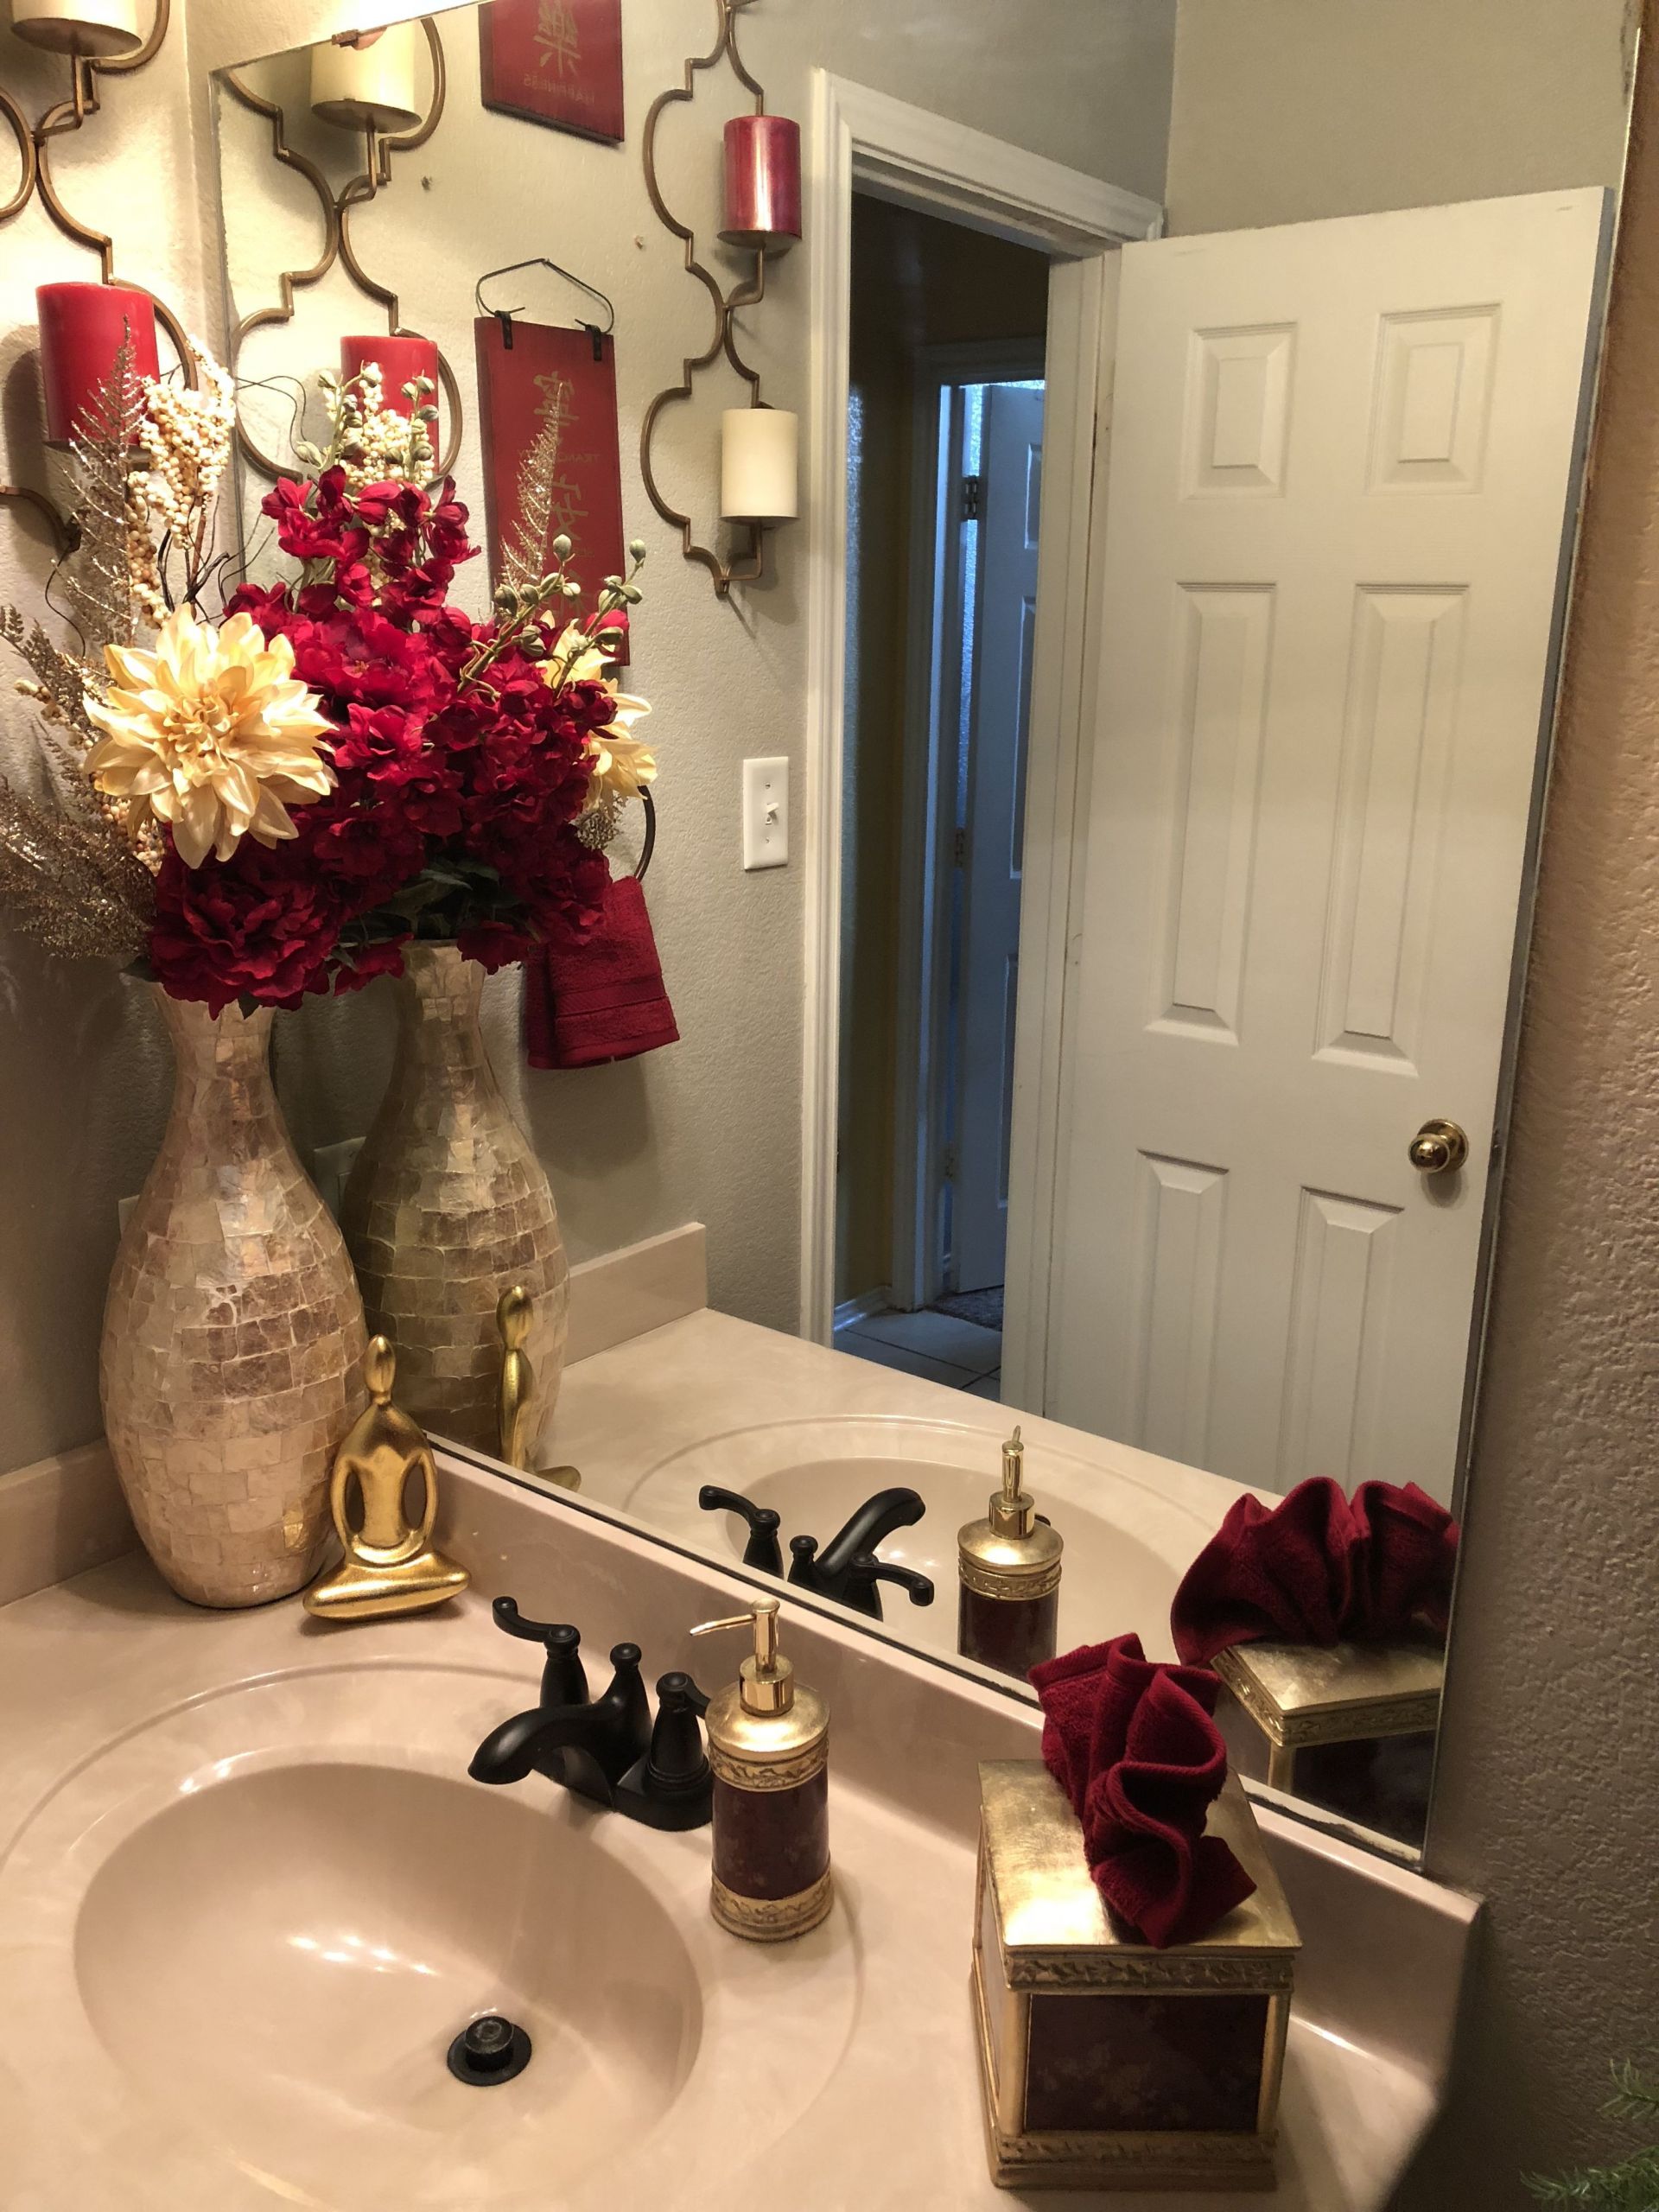 Red Bathroom Decor
 Pin by Mekco ishae on Apartments decorating